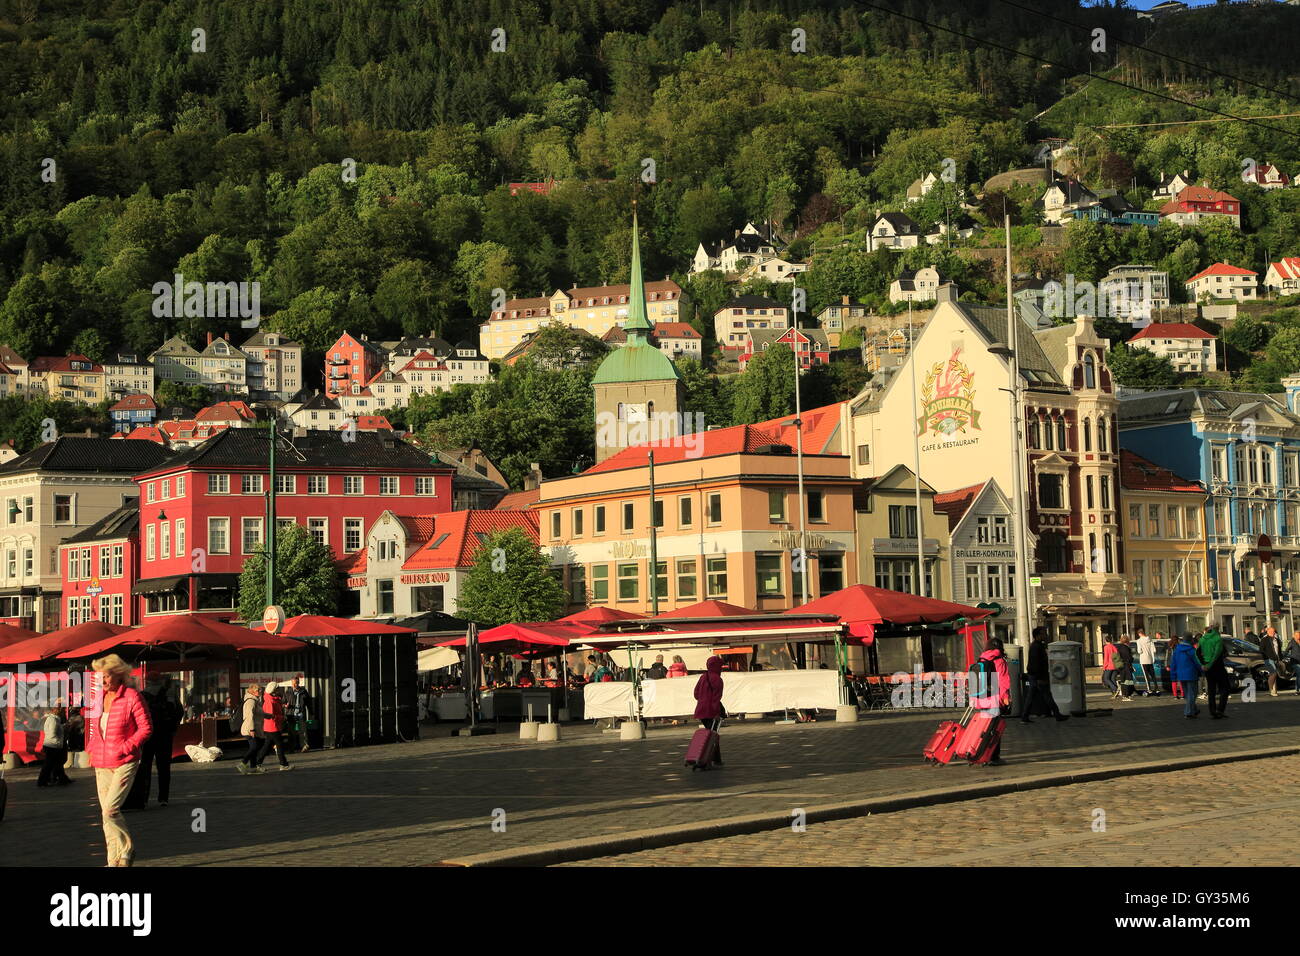 Historic buildings in the Torget market square area of Vagen harbour, Bergen, Norway Stock Photo